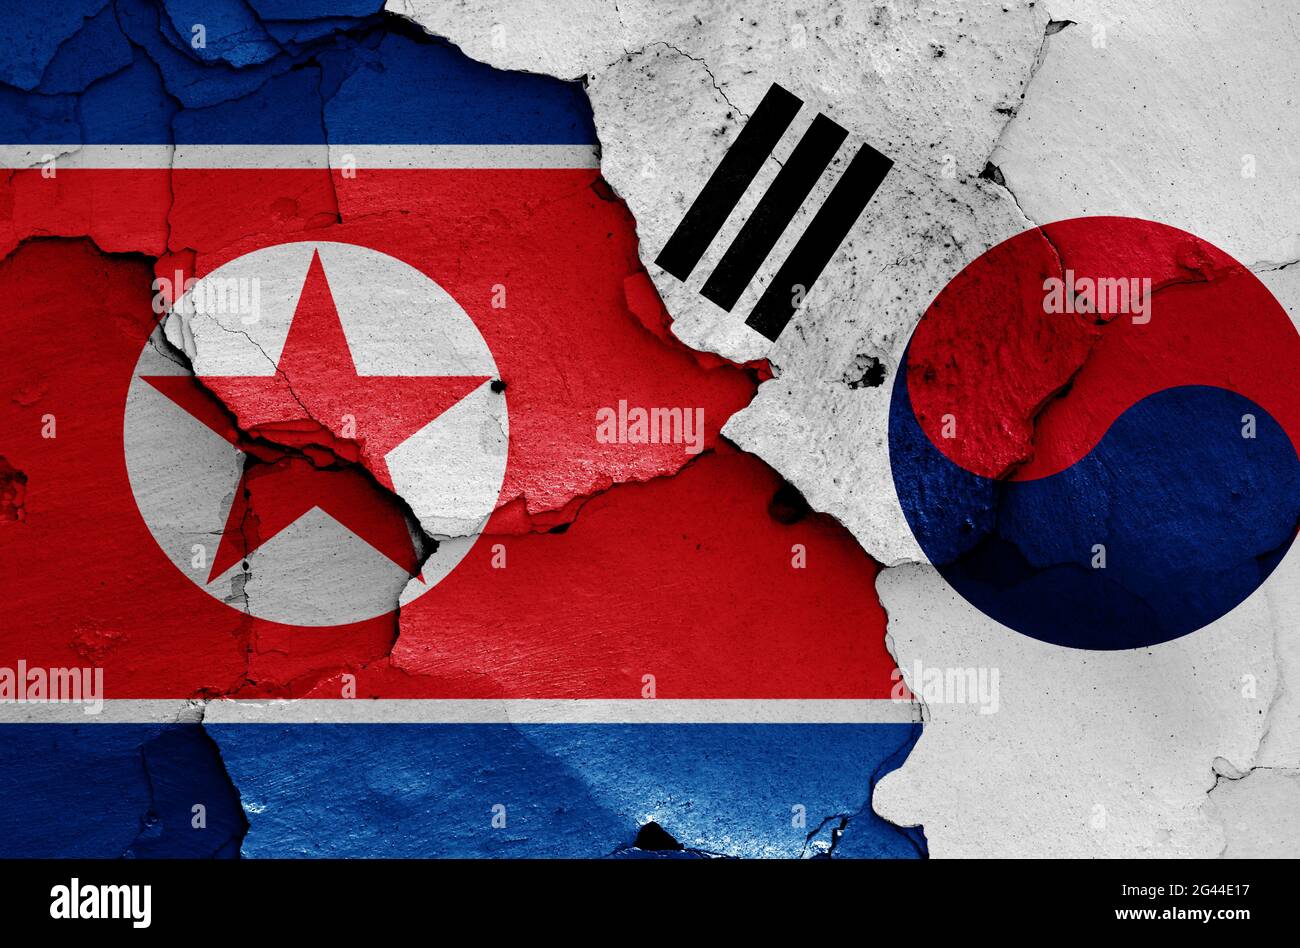 Flags of North Korea and South Korea painted on cracked wall Stock Photo